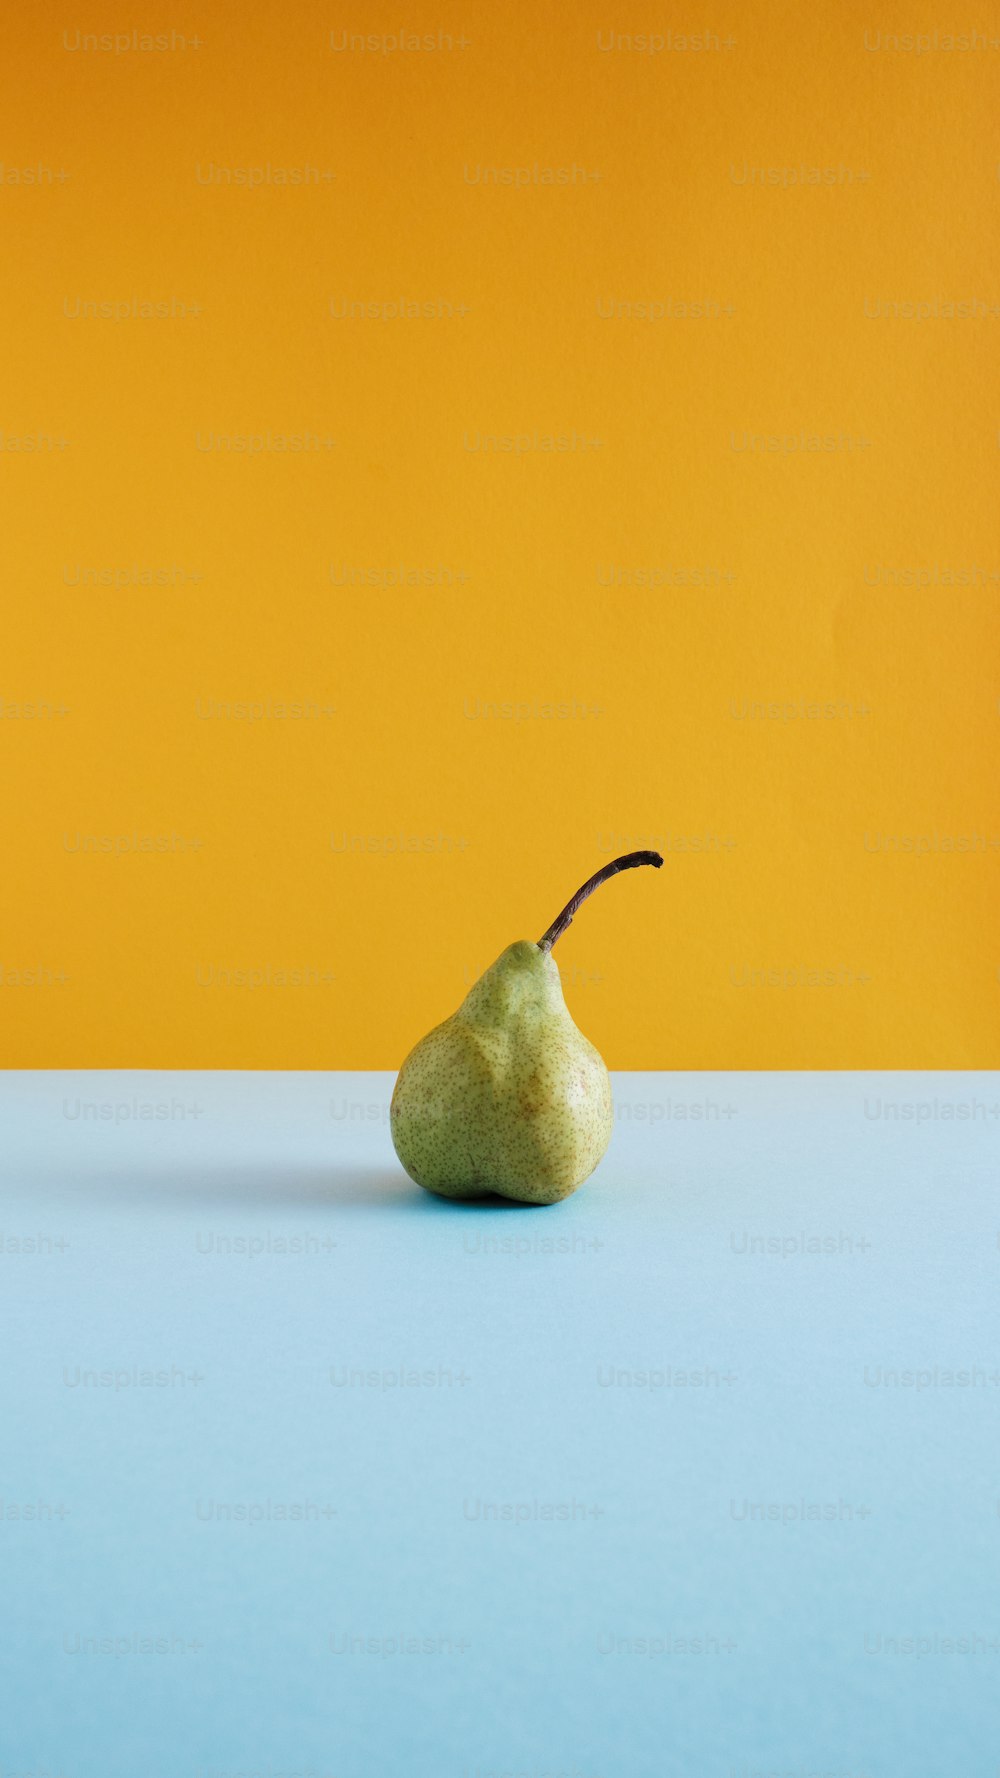 a pear on a blue surface with a yellow background